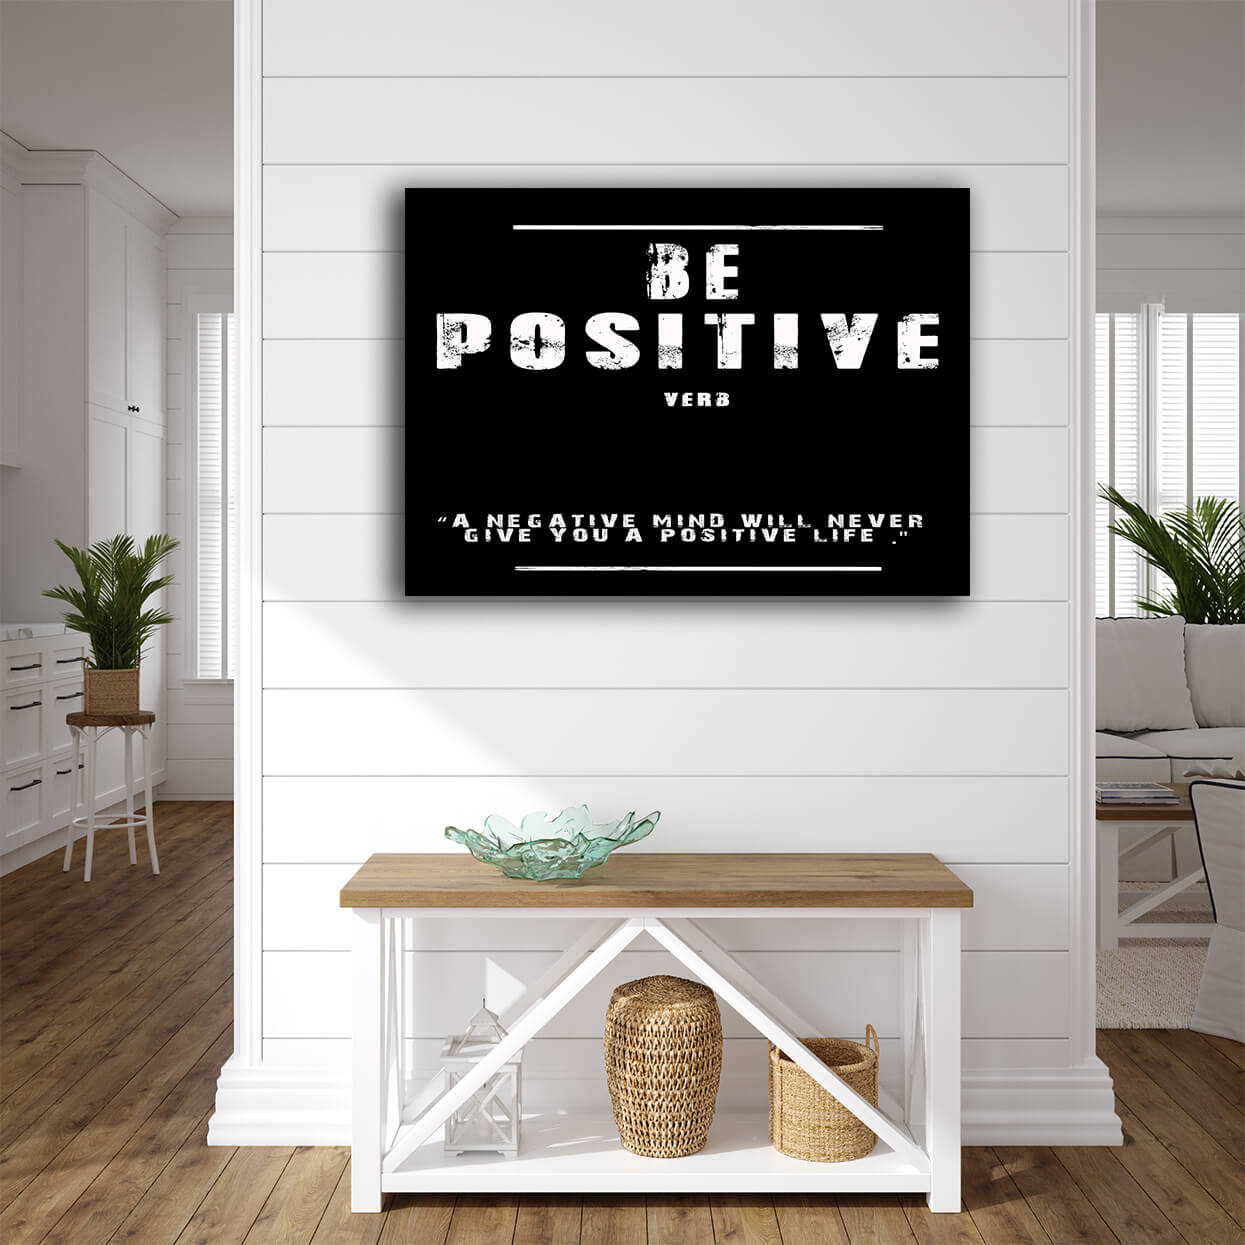 M008__0016_MS__0025_BE POSITIVE (A NEGATIVE MIND WILL NEVER GIVE YOU A POSITIVE LIFE) AOAY9160